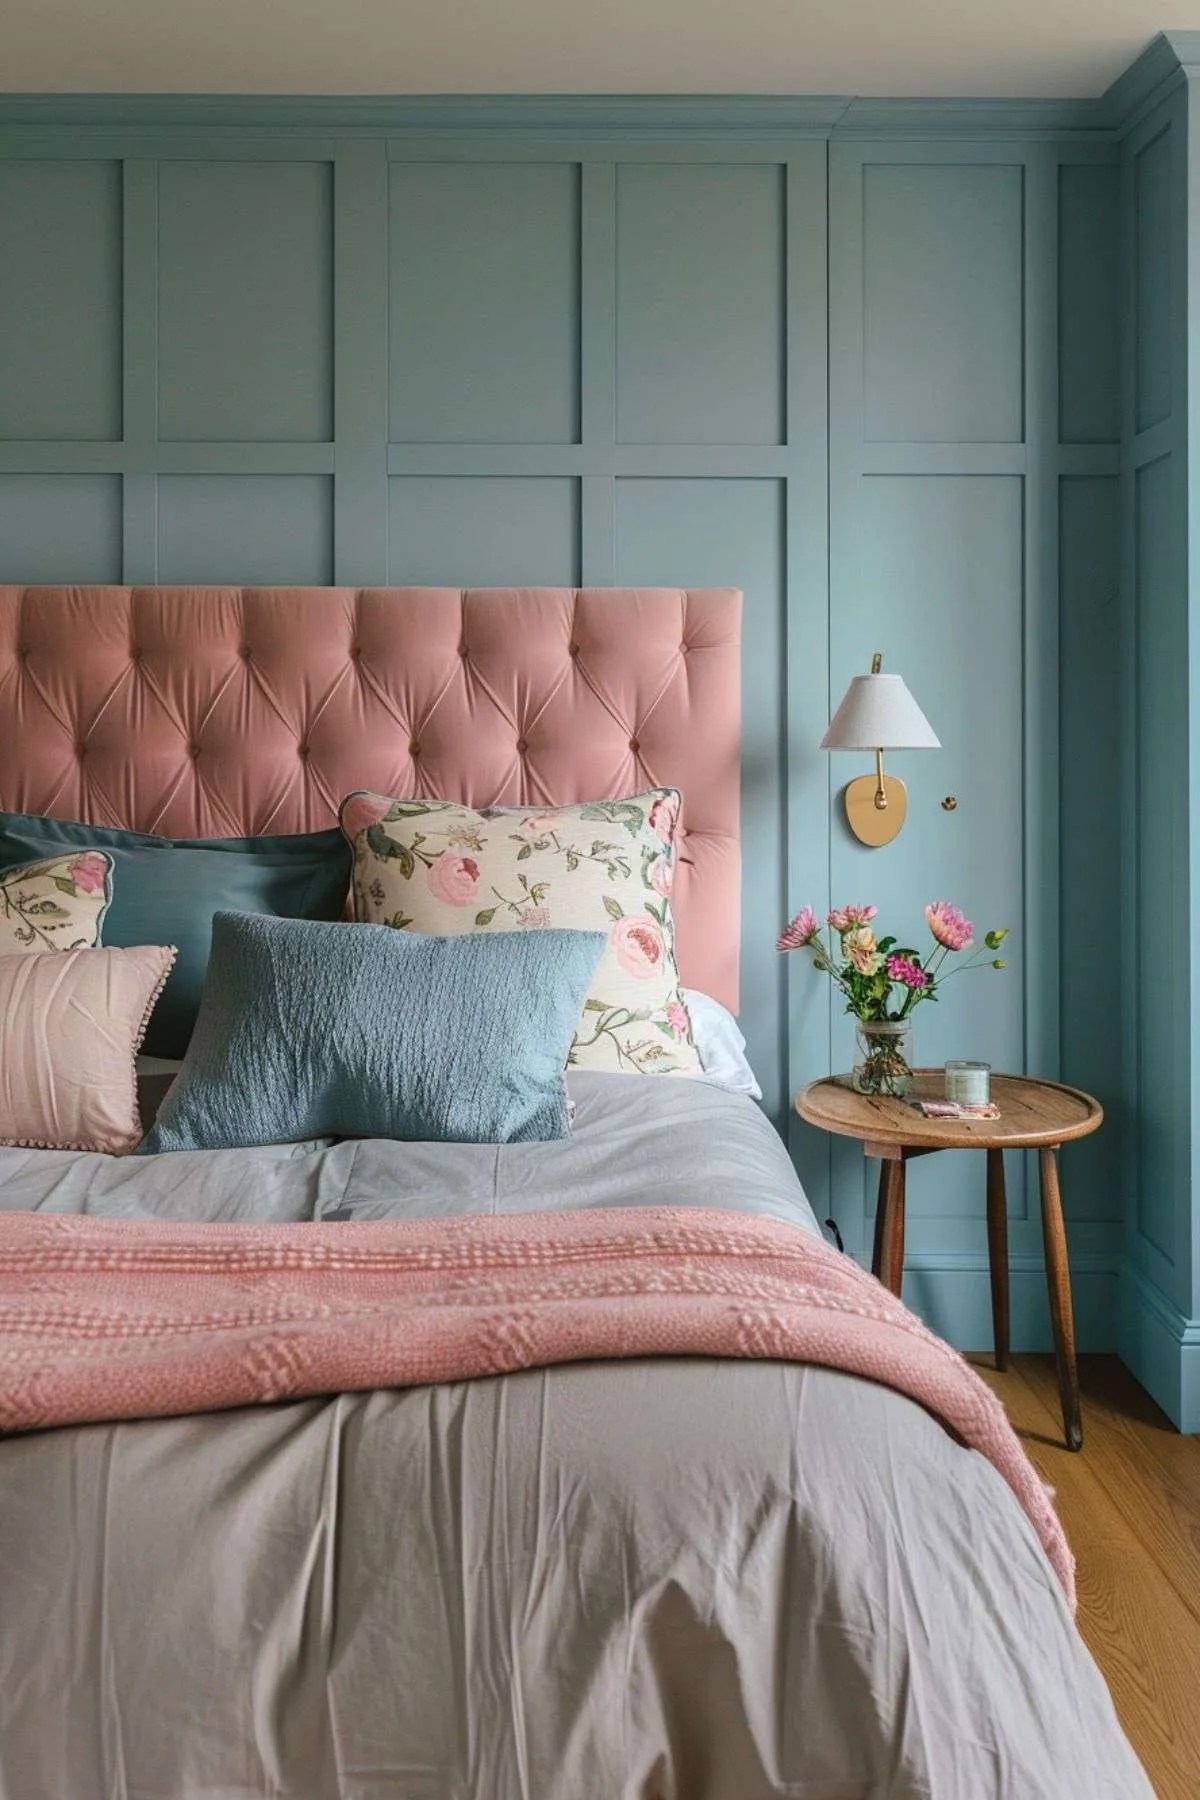 Expert Tips for Bedroom Styling : How to Style With Ease